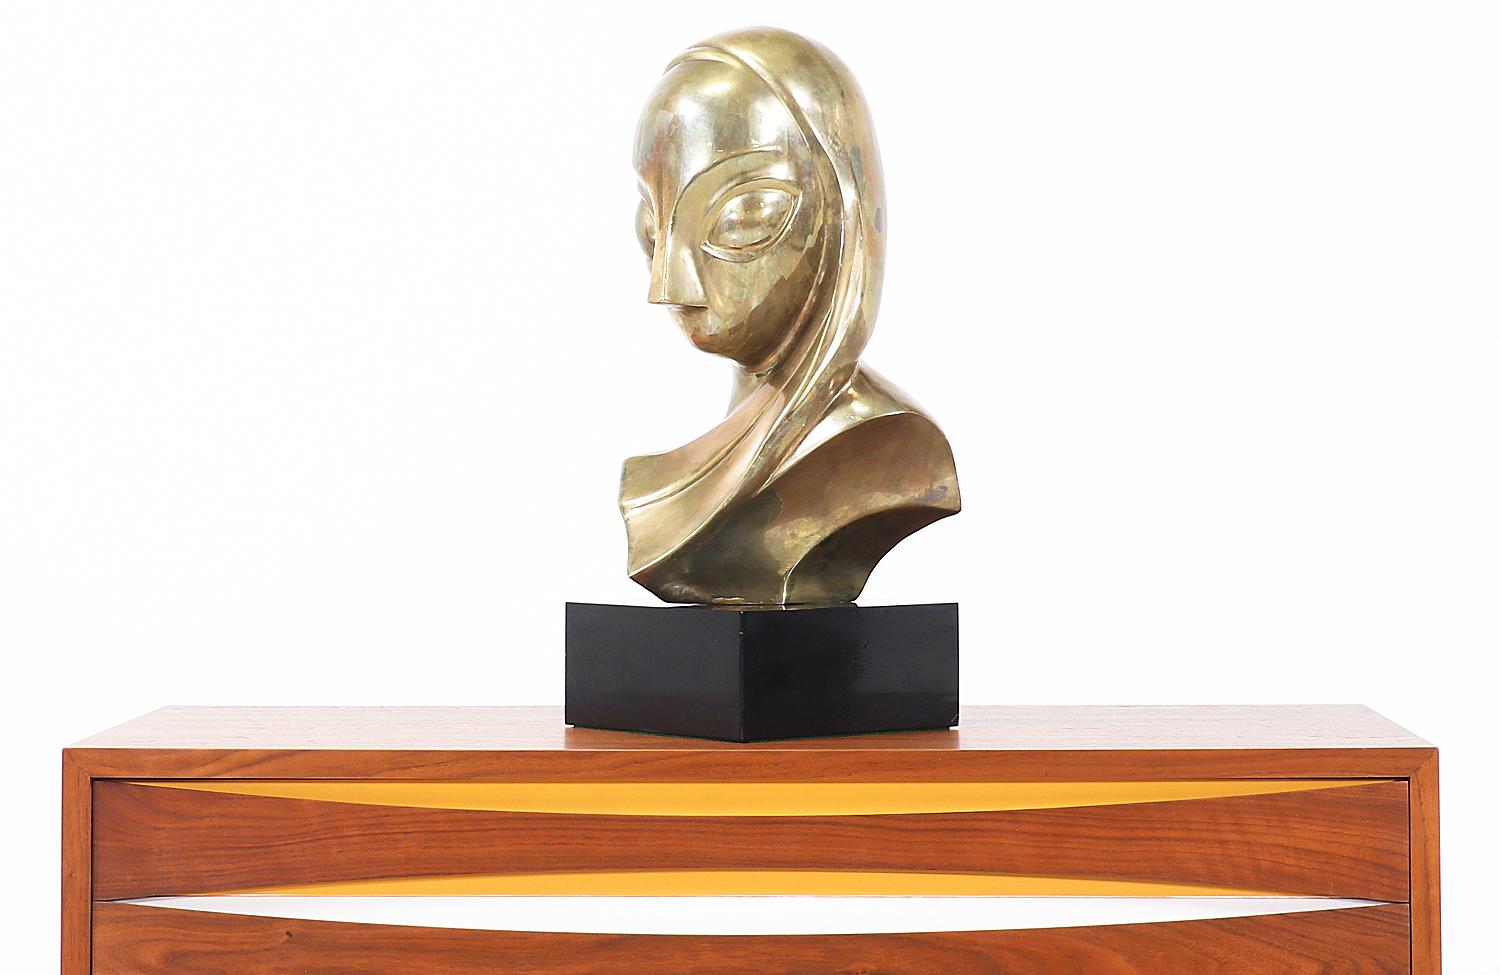 Vintage modernist bust sculpture designed and manufactured in the United States, circa 1970s. Inspired by the style of Constantin Brancusi, this sculpted woman bust is rendered in brass and mounted on a black base, creating a uniquely beautiful